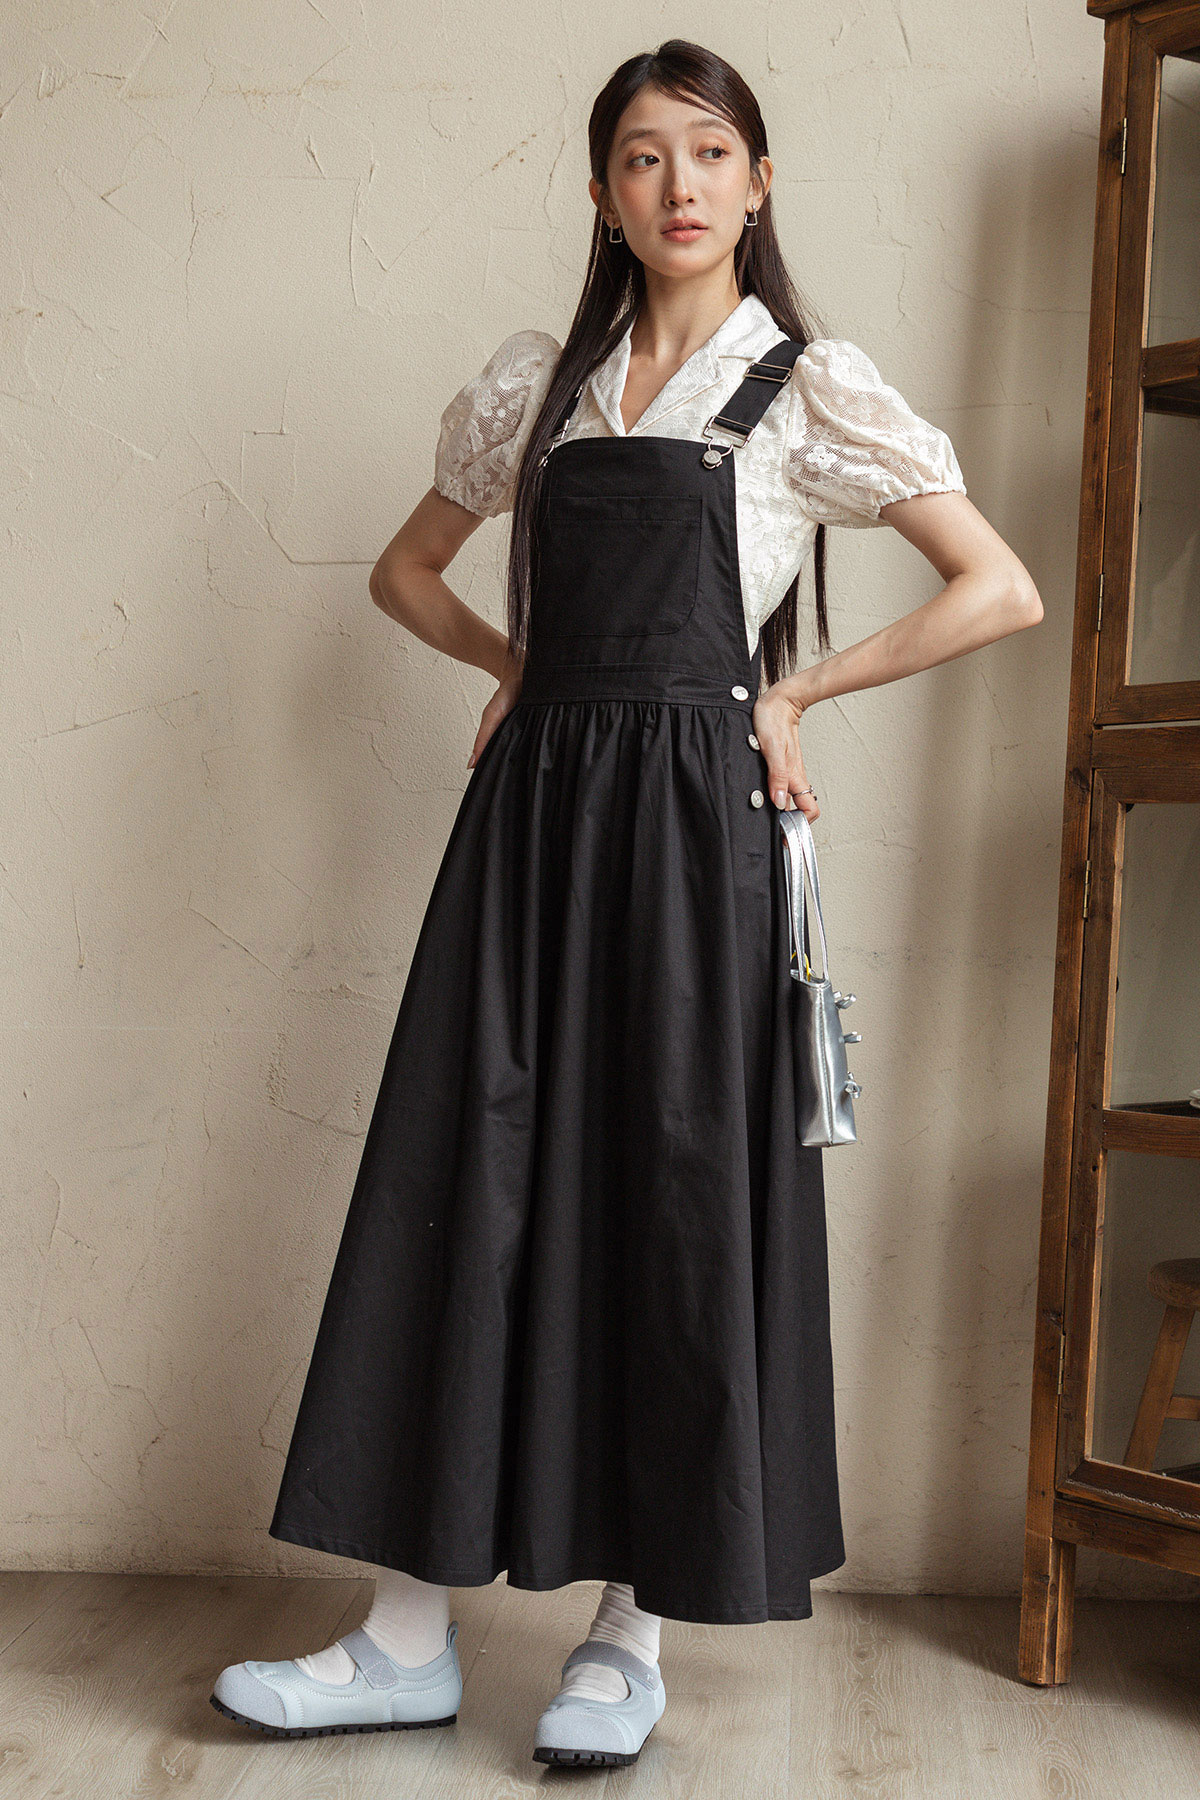 JANIVER DUNGAREE DRESS - NOIR [BY MODPARADE]